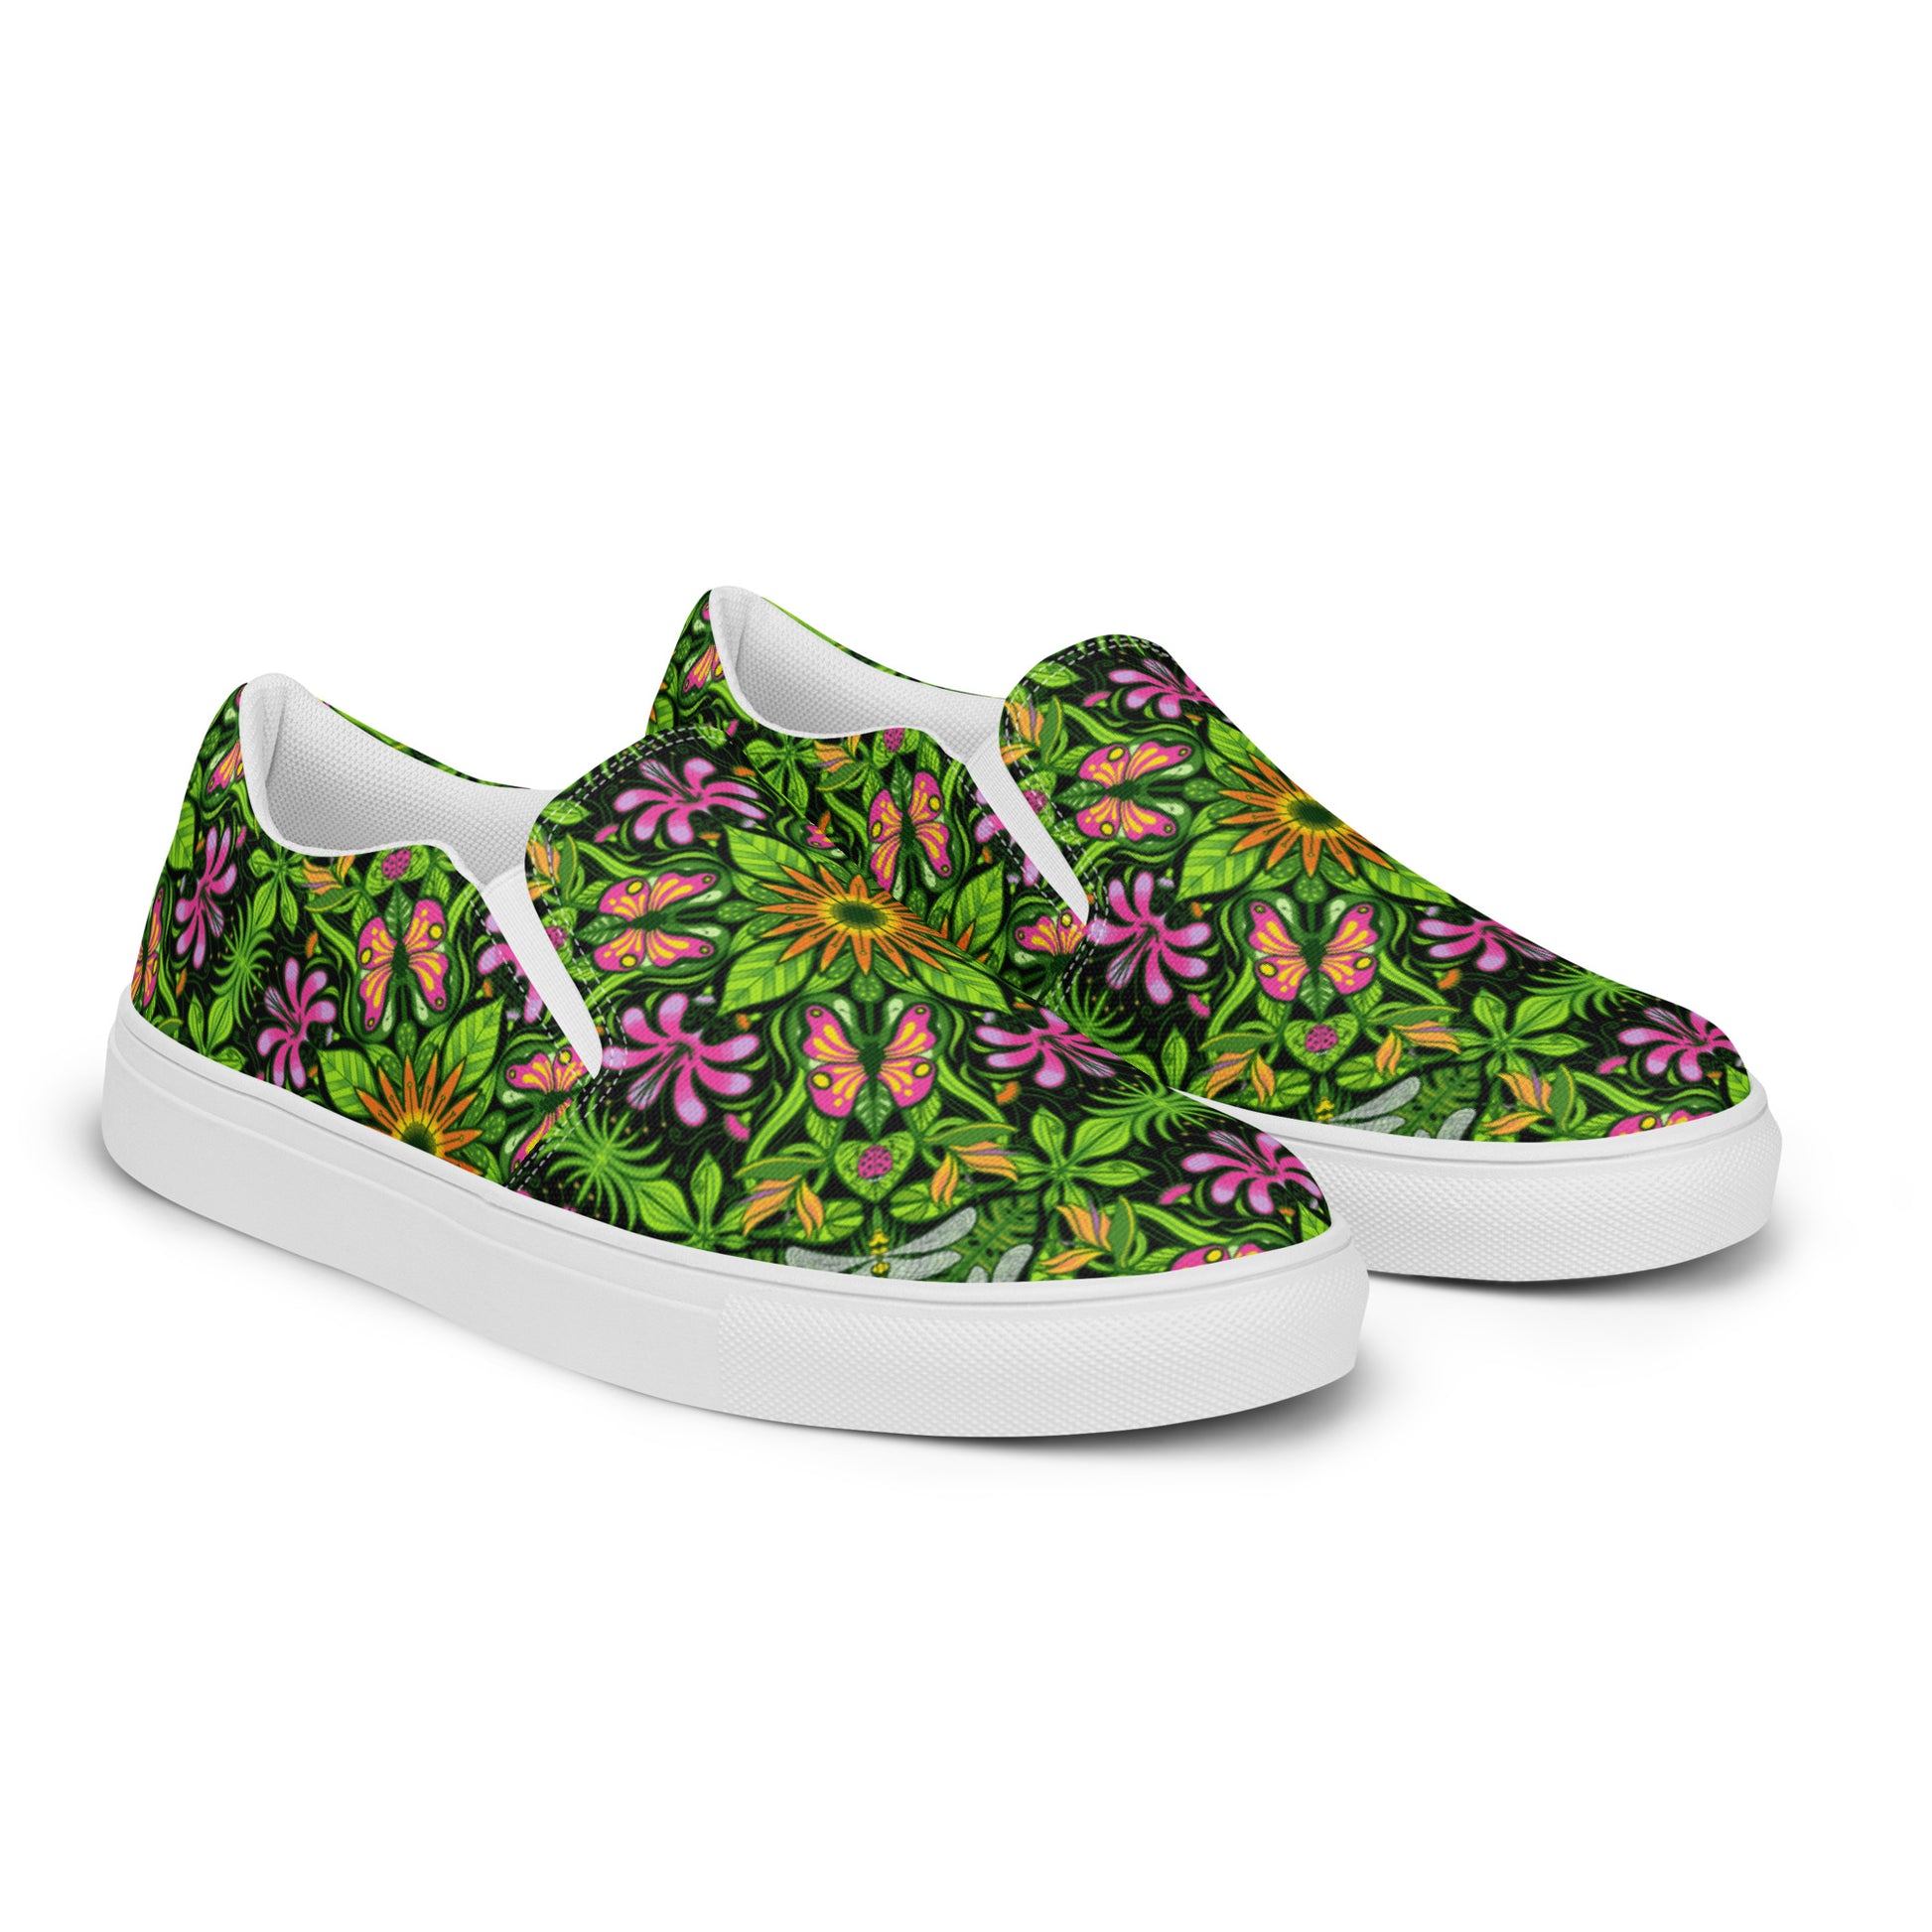 Magical garden full of flowers and insects Women’s slip-on canvas shoes. Overview